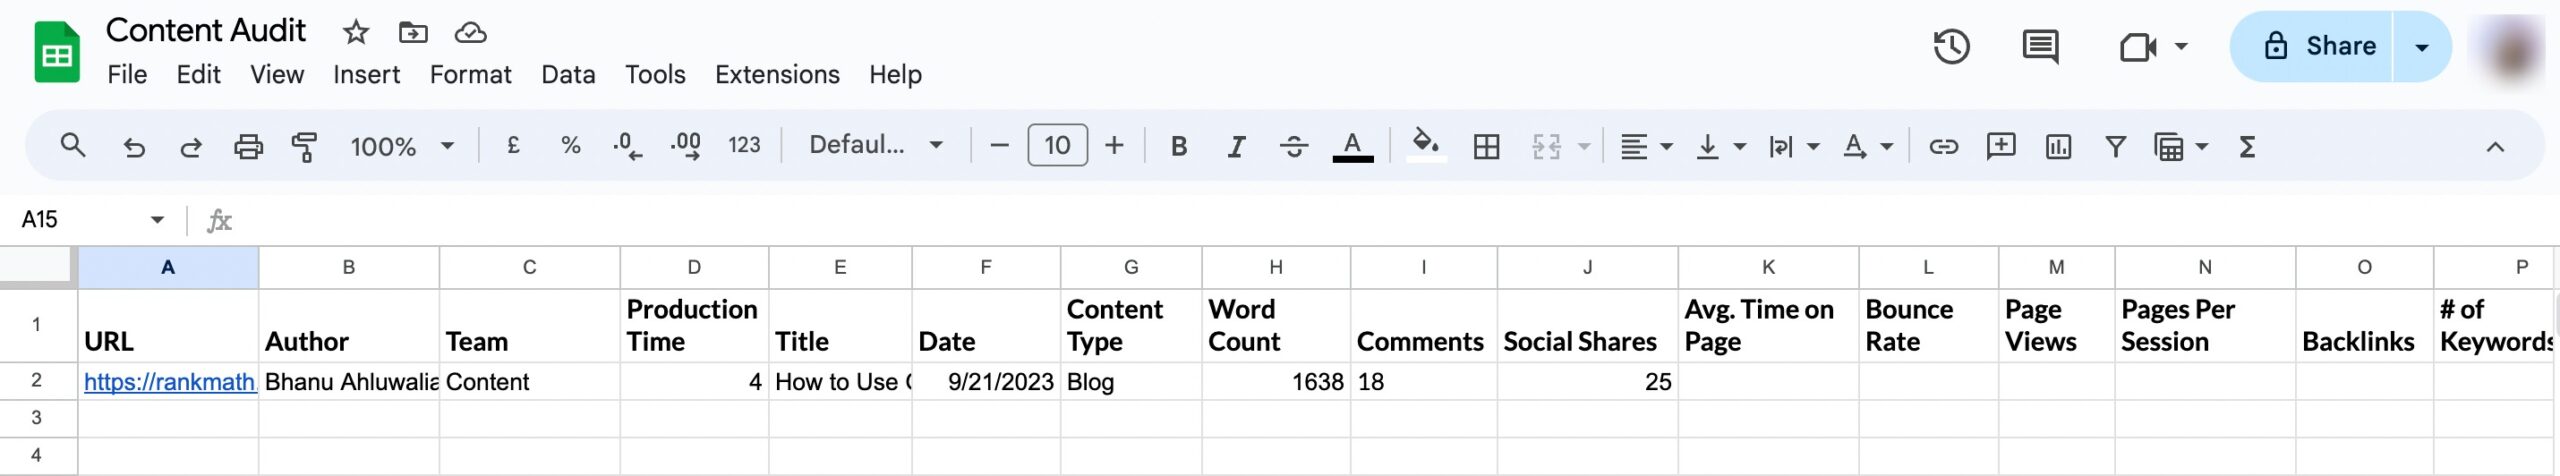 Content Audit spreadsheet example